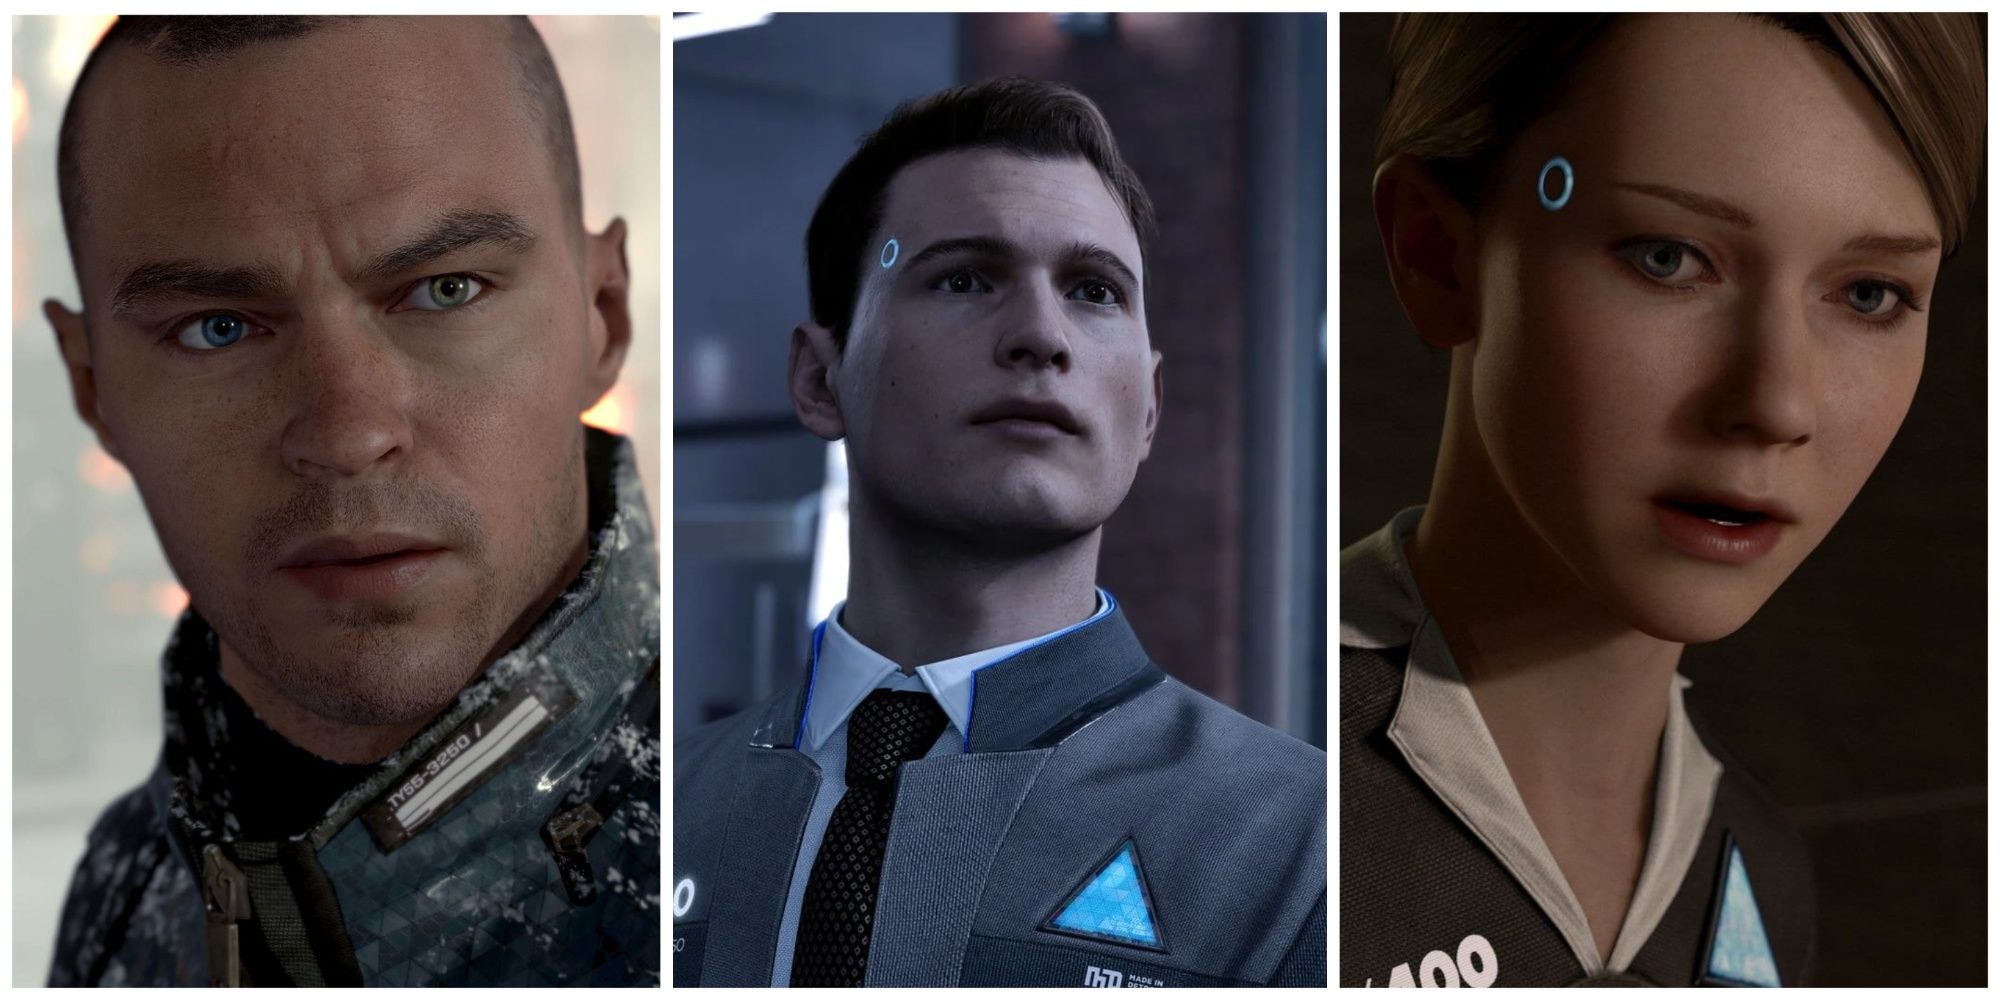 Collage of the three protagonists of Detroit: Become Human: Markus (left), Connor (middle), and Kara (right).